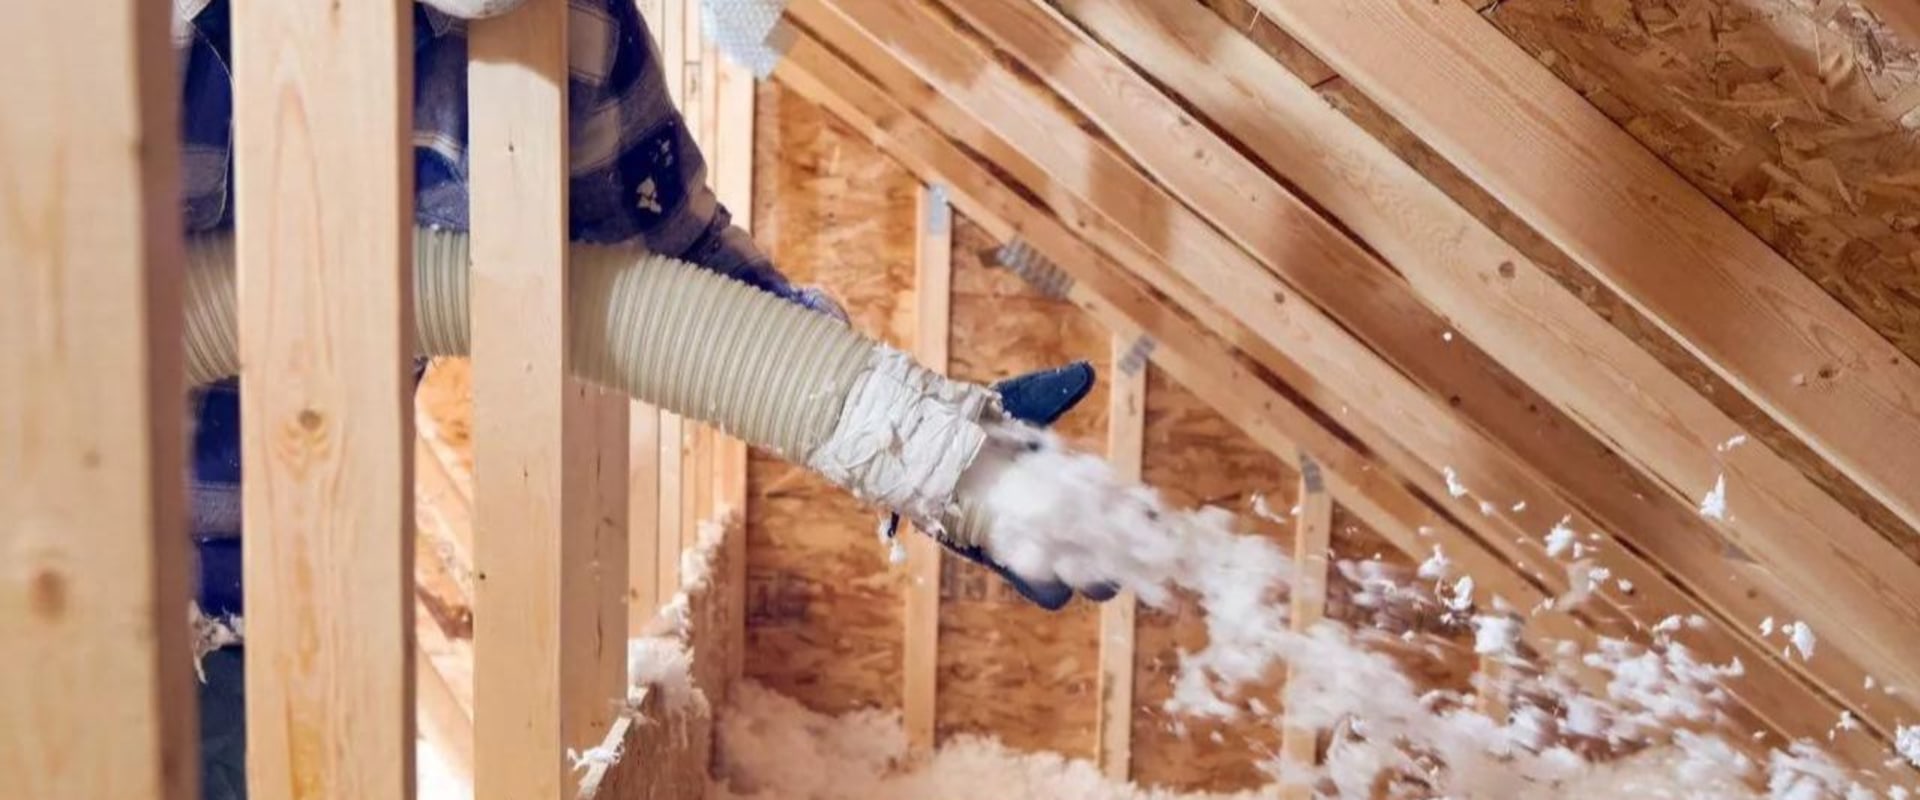 Insulating Your Home in Davie, FL: A Comprehensive Guide to R-Values